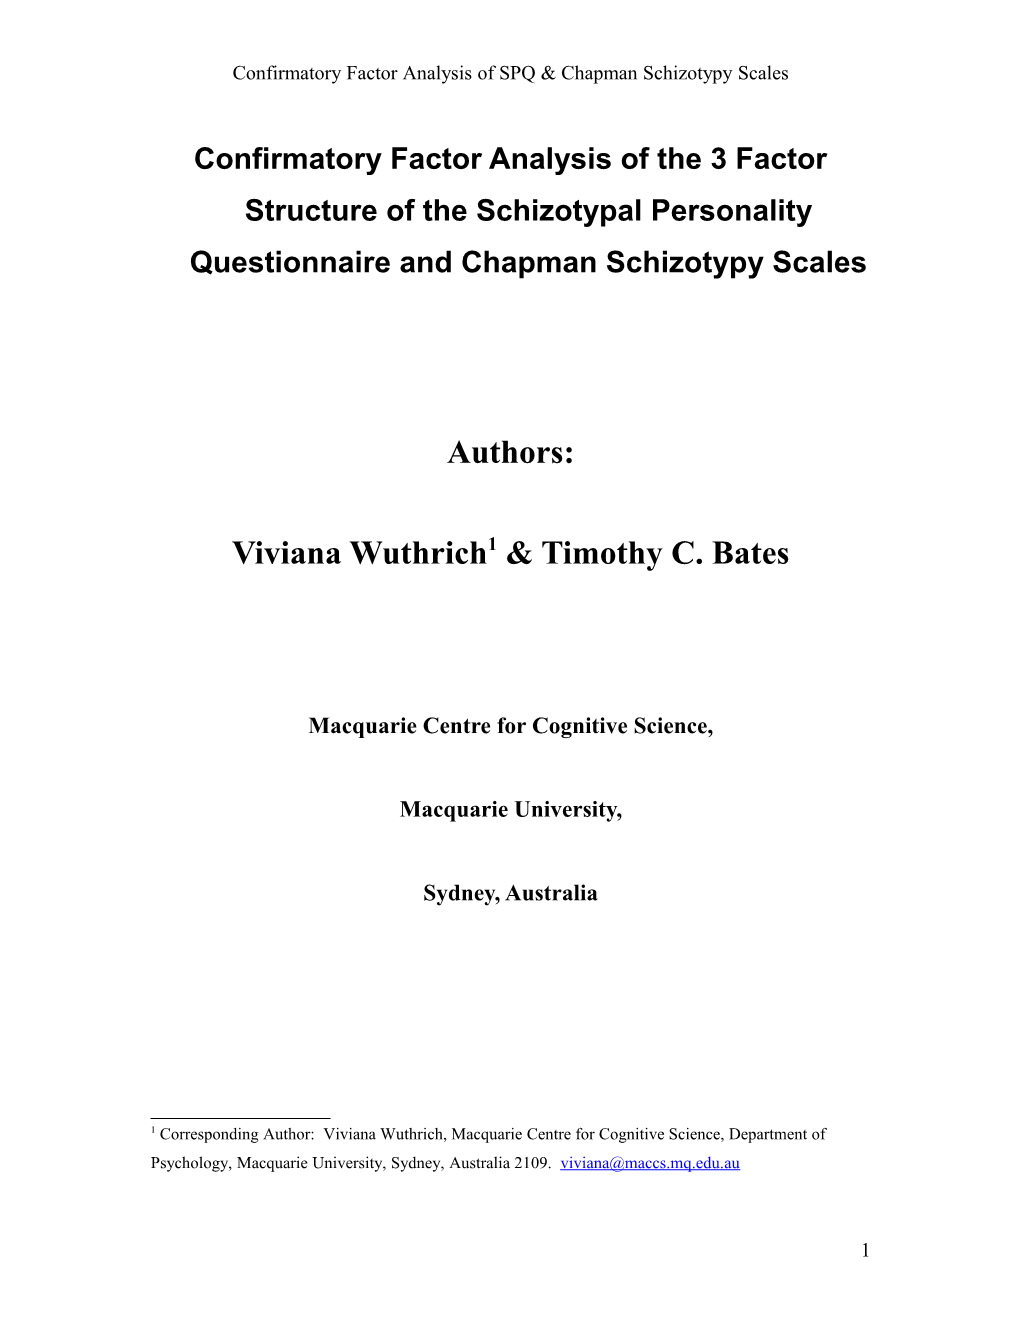 Relationship Between SPQ, Chapman S Schizotypy Scales and the NEO PI-R